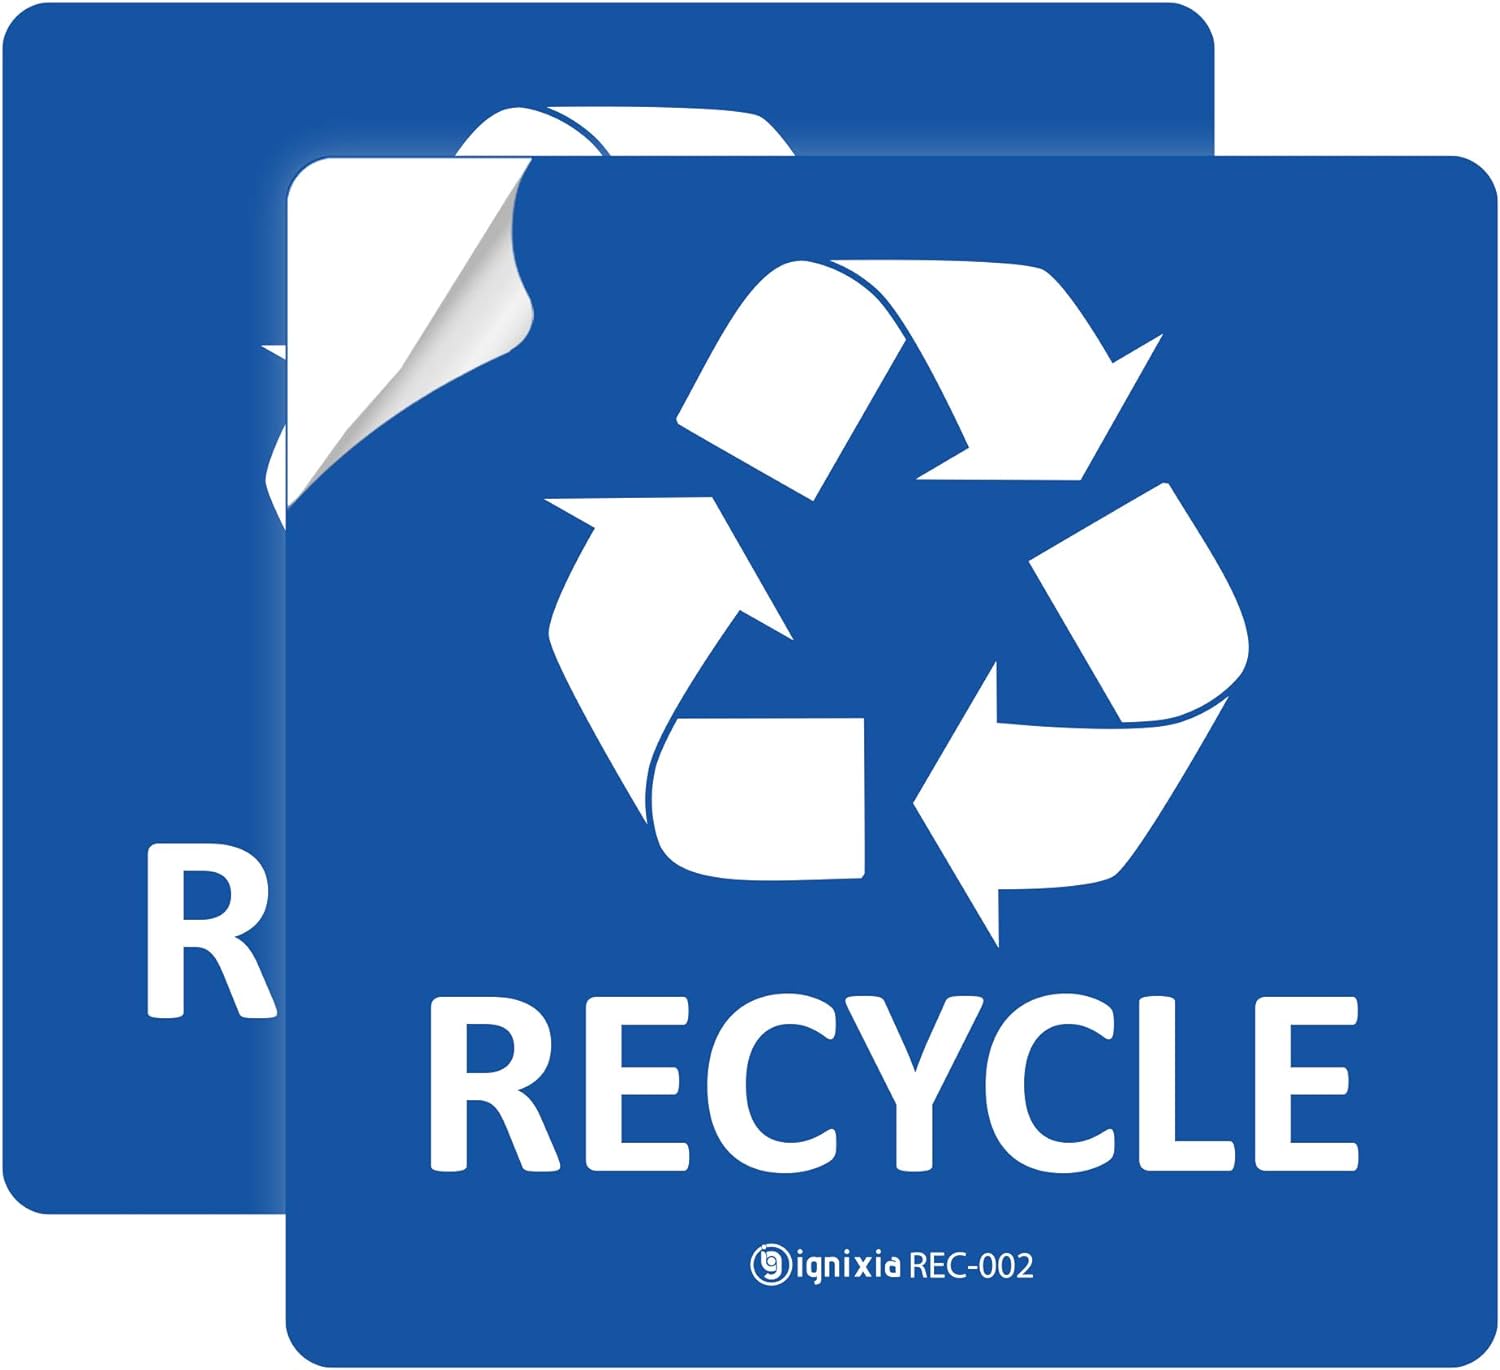 Recycling Stickers Recycle and Trash Sticker for Trash can with over lamination Recycle and Trash Sign Decals self Adhesive 5 X 5 Inches Square Recycle Label Pack of 04 Black & Green IGNIXIA 